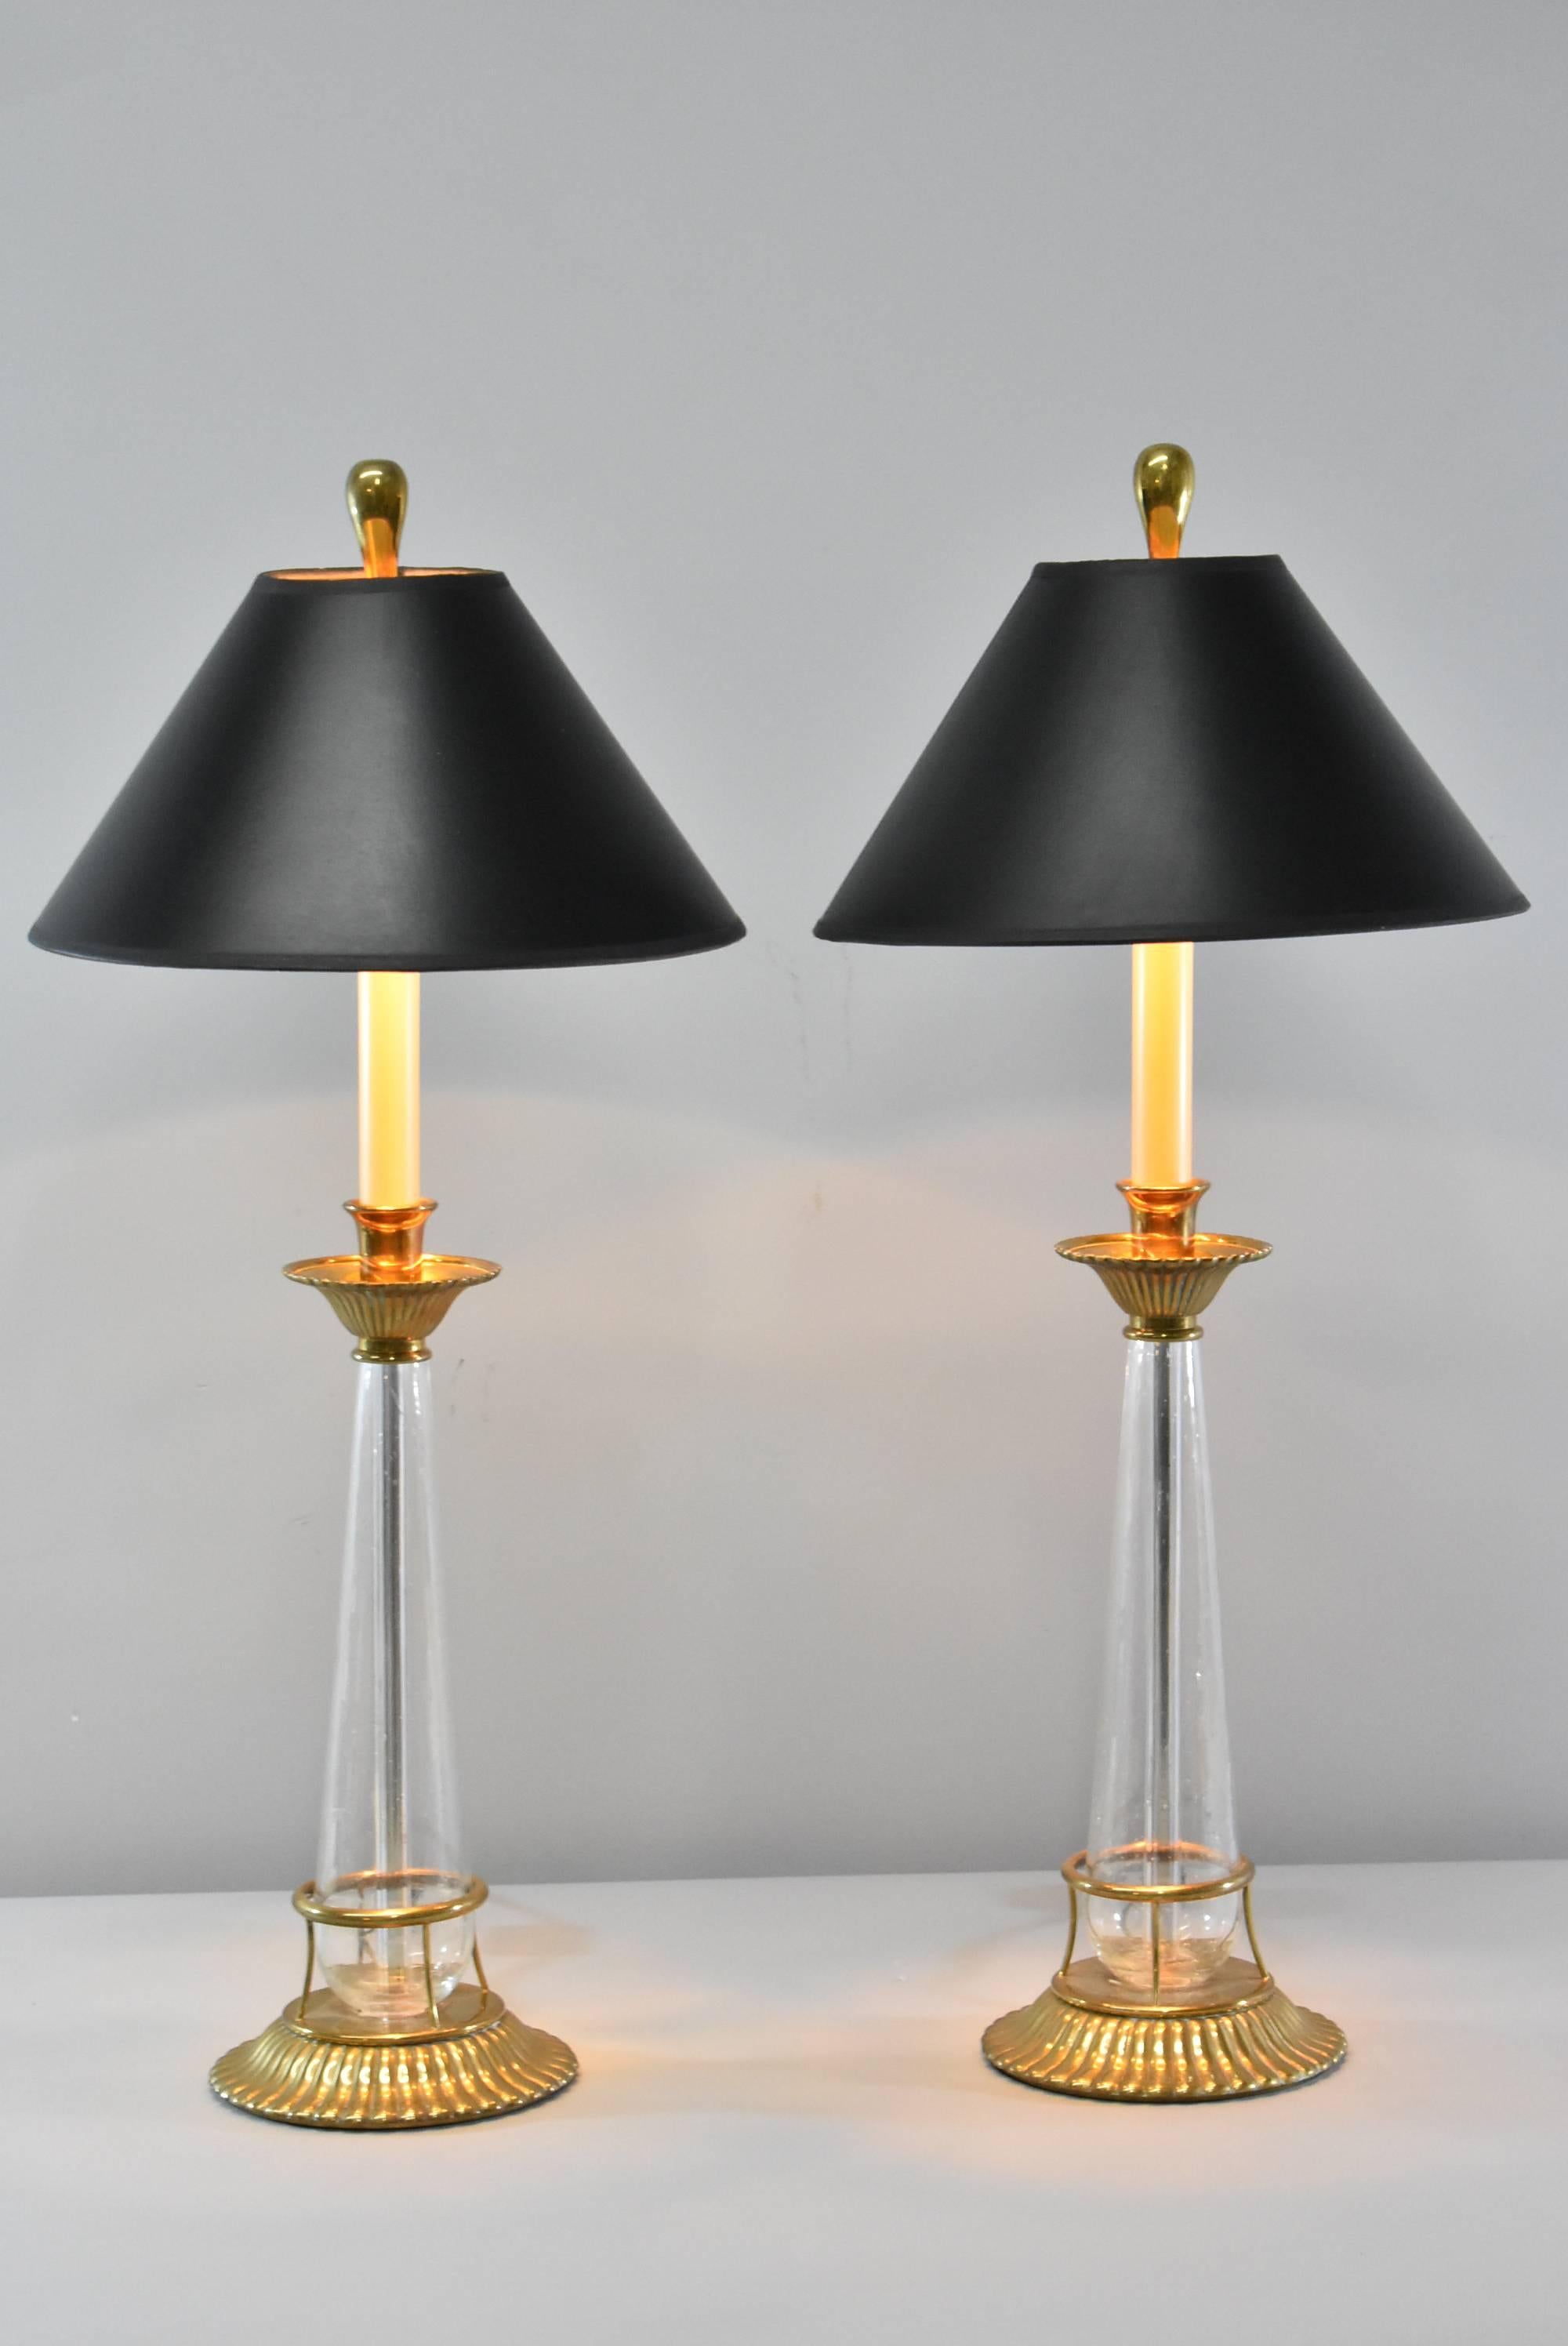 A beautiful pair of brass and glass buffet lamps by Chapman. They feature tapered glass bodies, brass boboches, a fluted design base, faux candle motif and brass inverted teardrop shape finials. Very good condition with good wiring and a two way